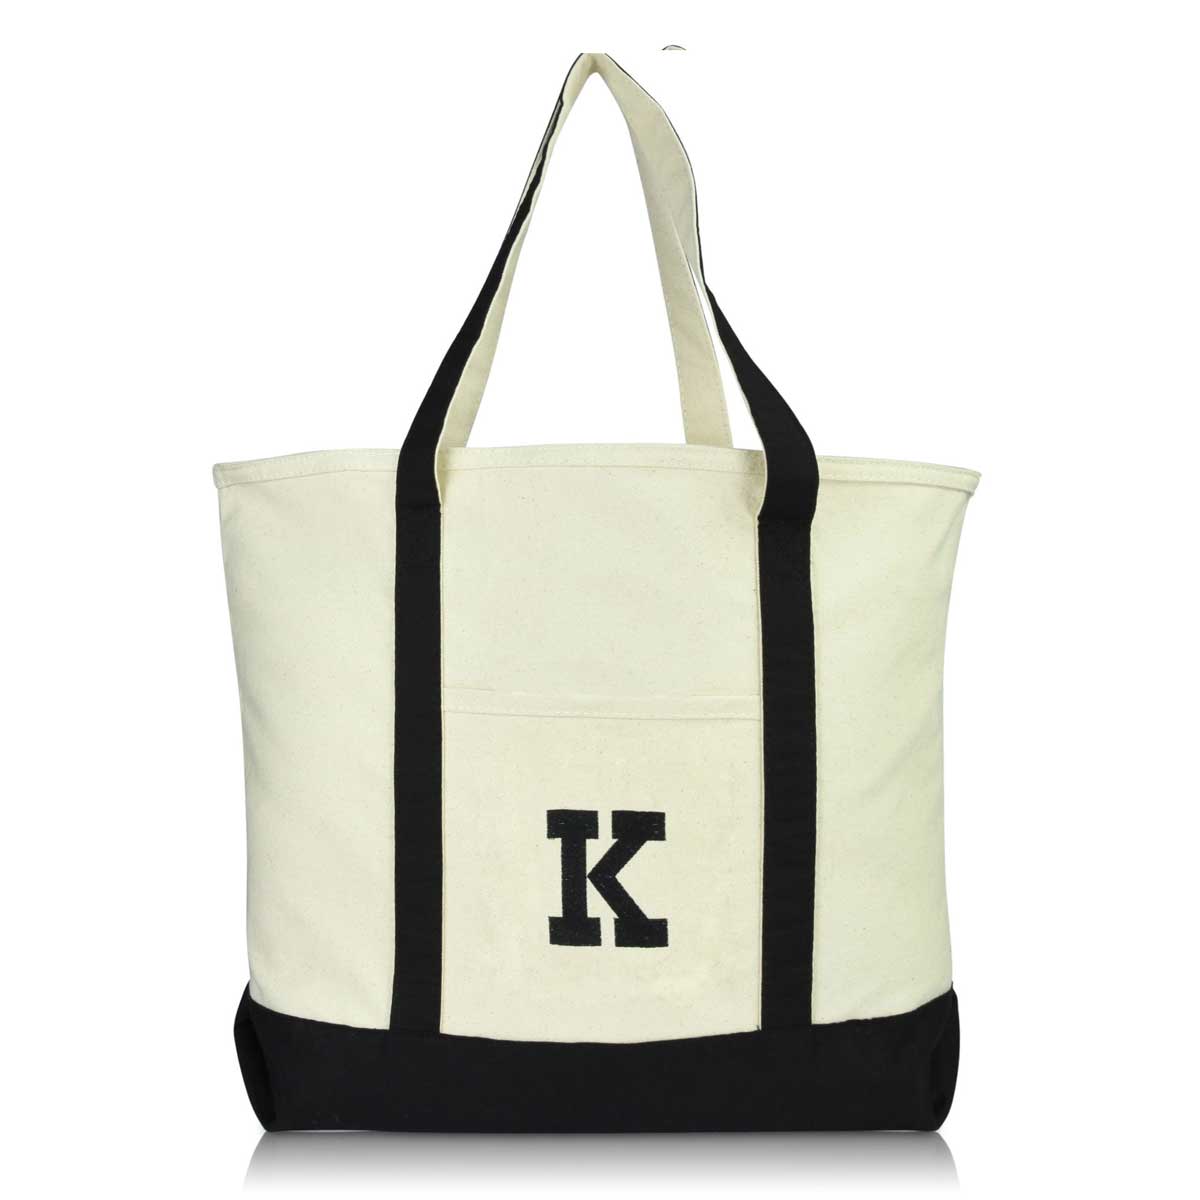 Personalized Tote Bags With Zipper - Zippered Canvas Tote Bags Cheap